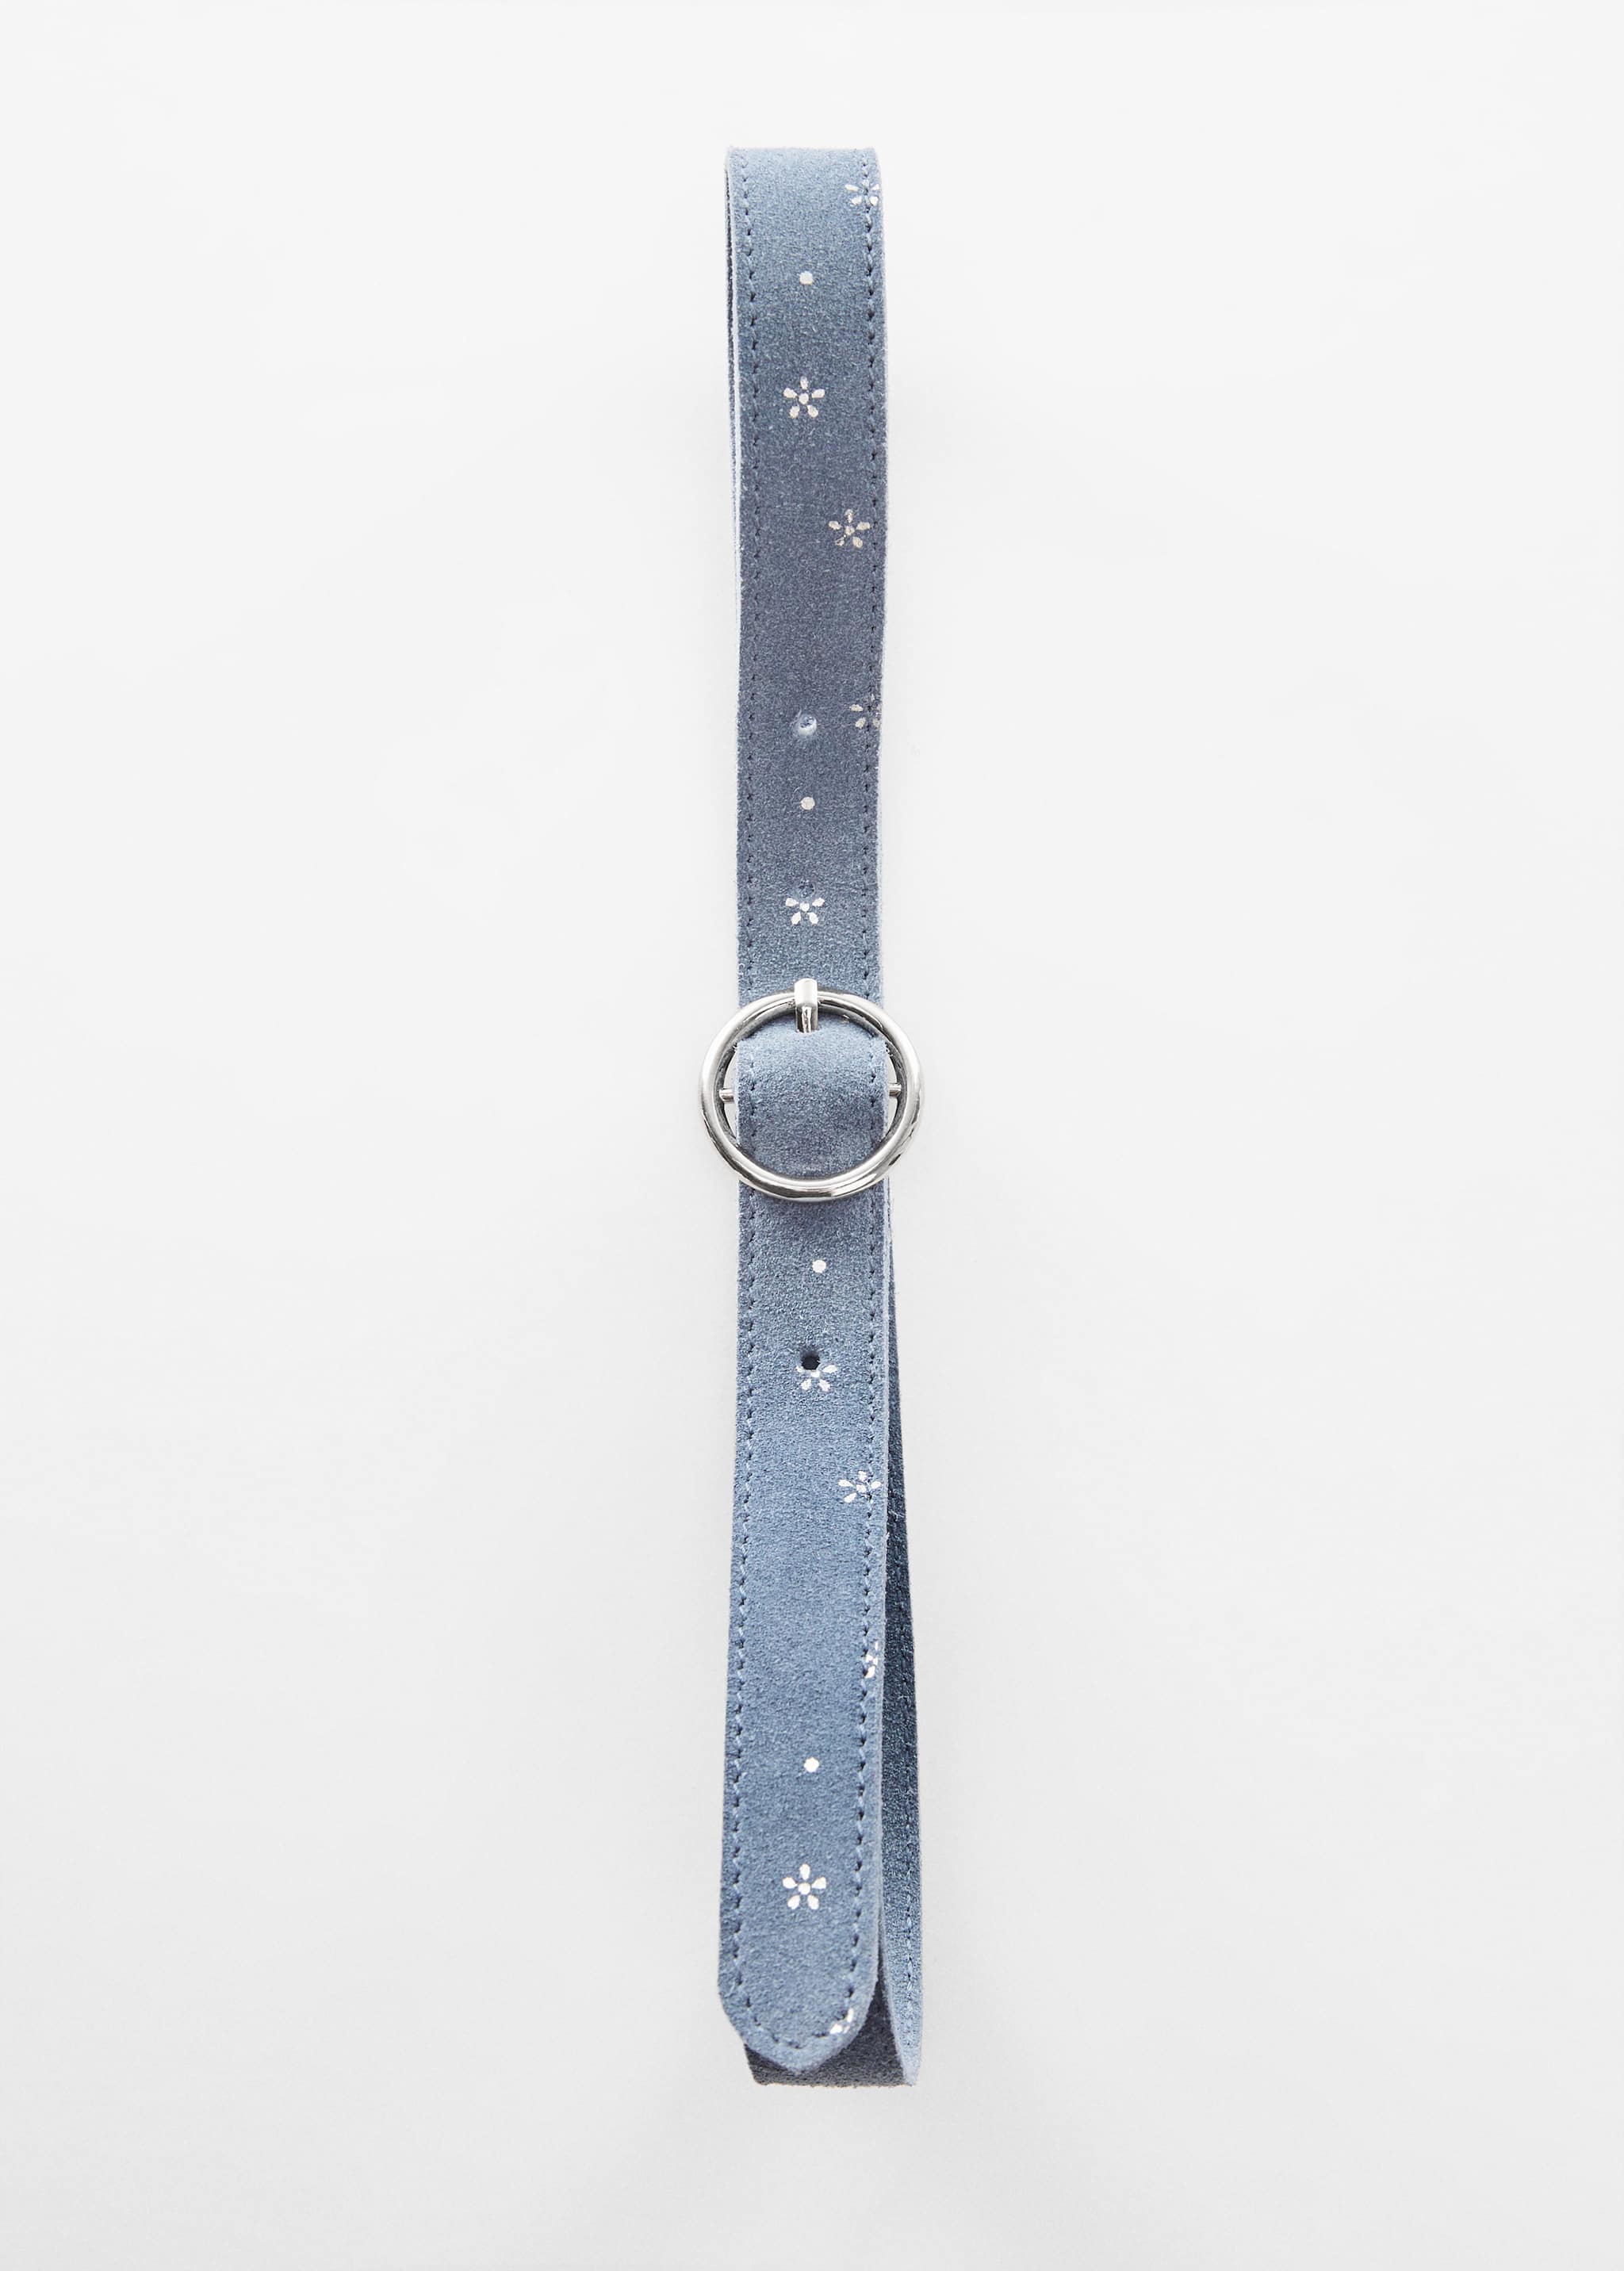 Buckle leather belt - Details of the article 1